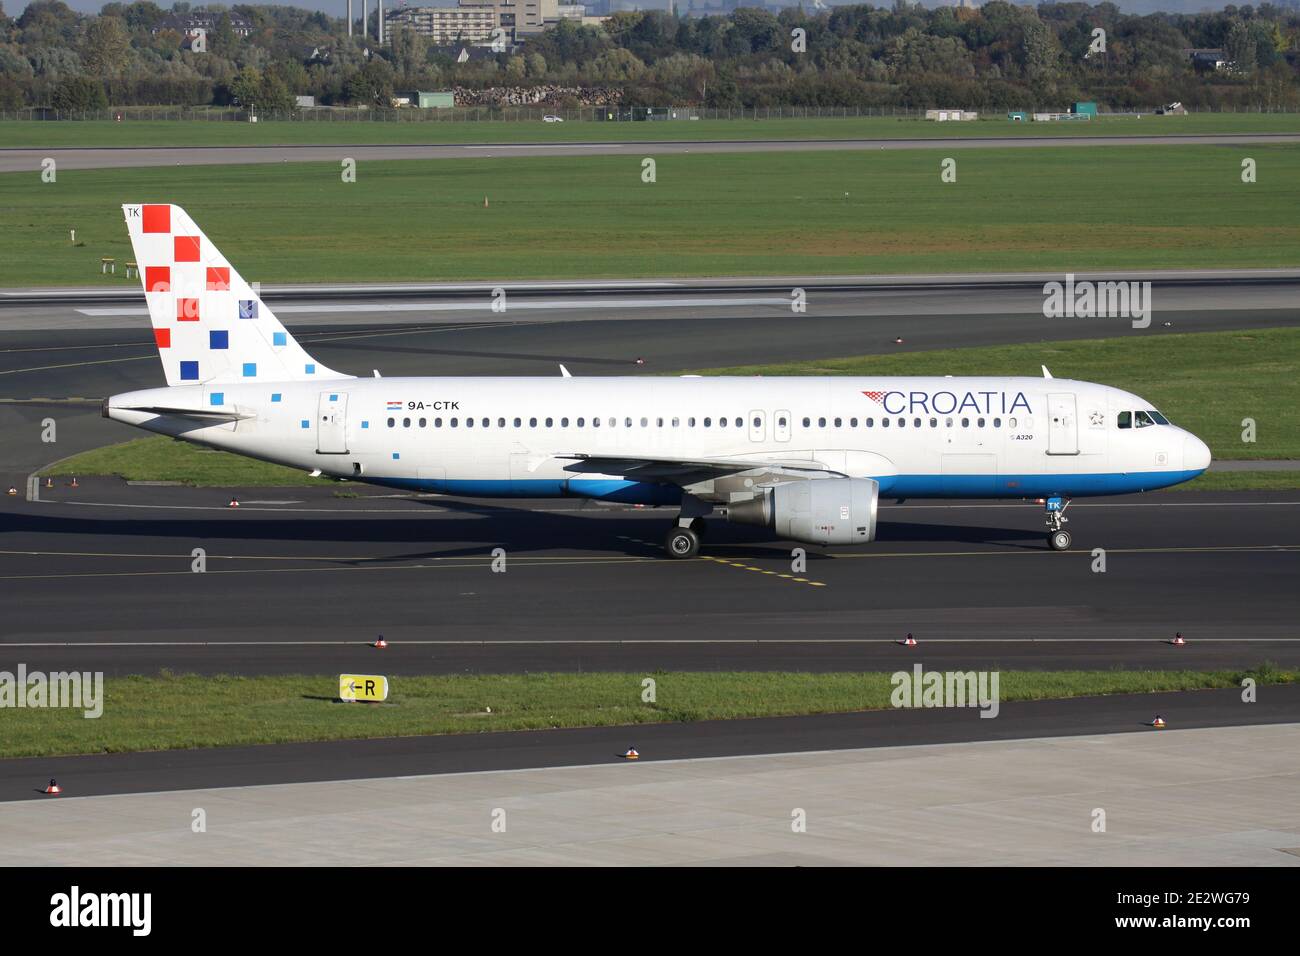 Croatia Airlines Airbus A320-200 with registration 9A-CTK on taxiway at Dusseldorf Airport. Stock Photo